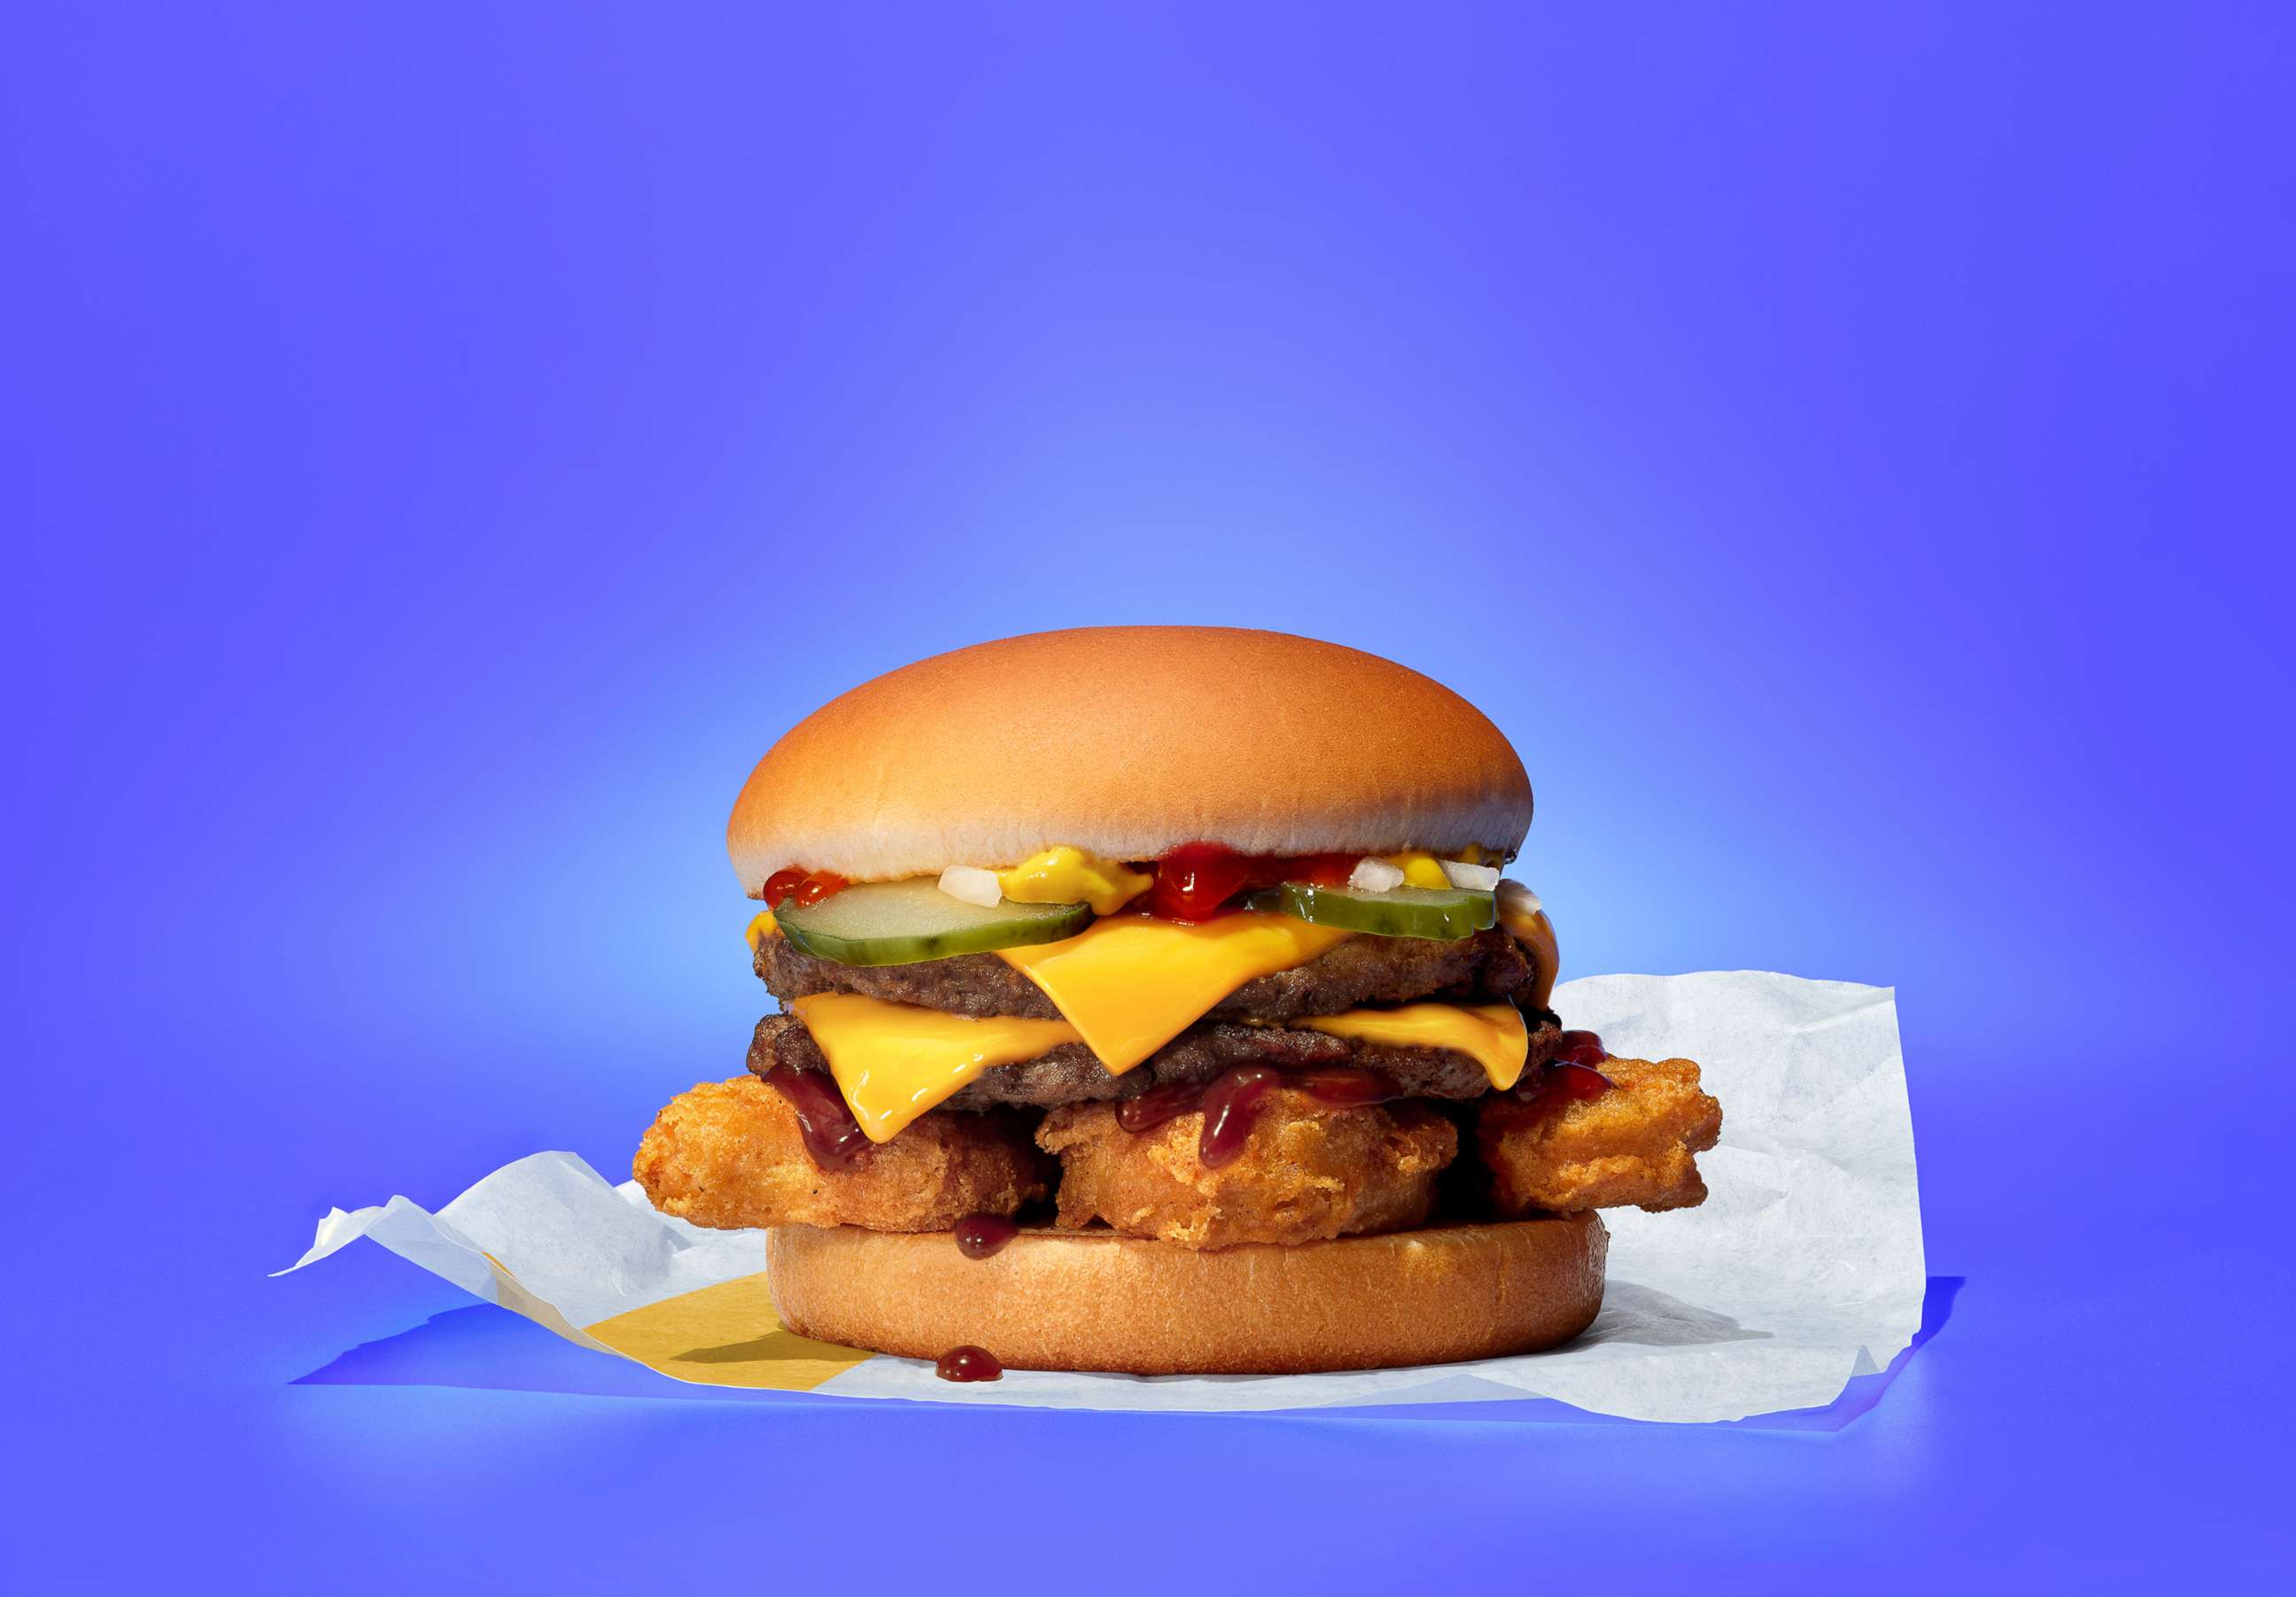 PHOTO: A "crunchy double" will now be on the menu at McDonald's.